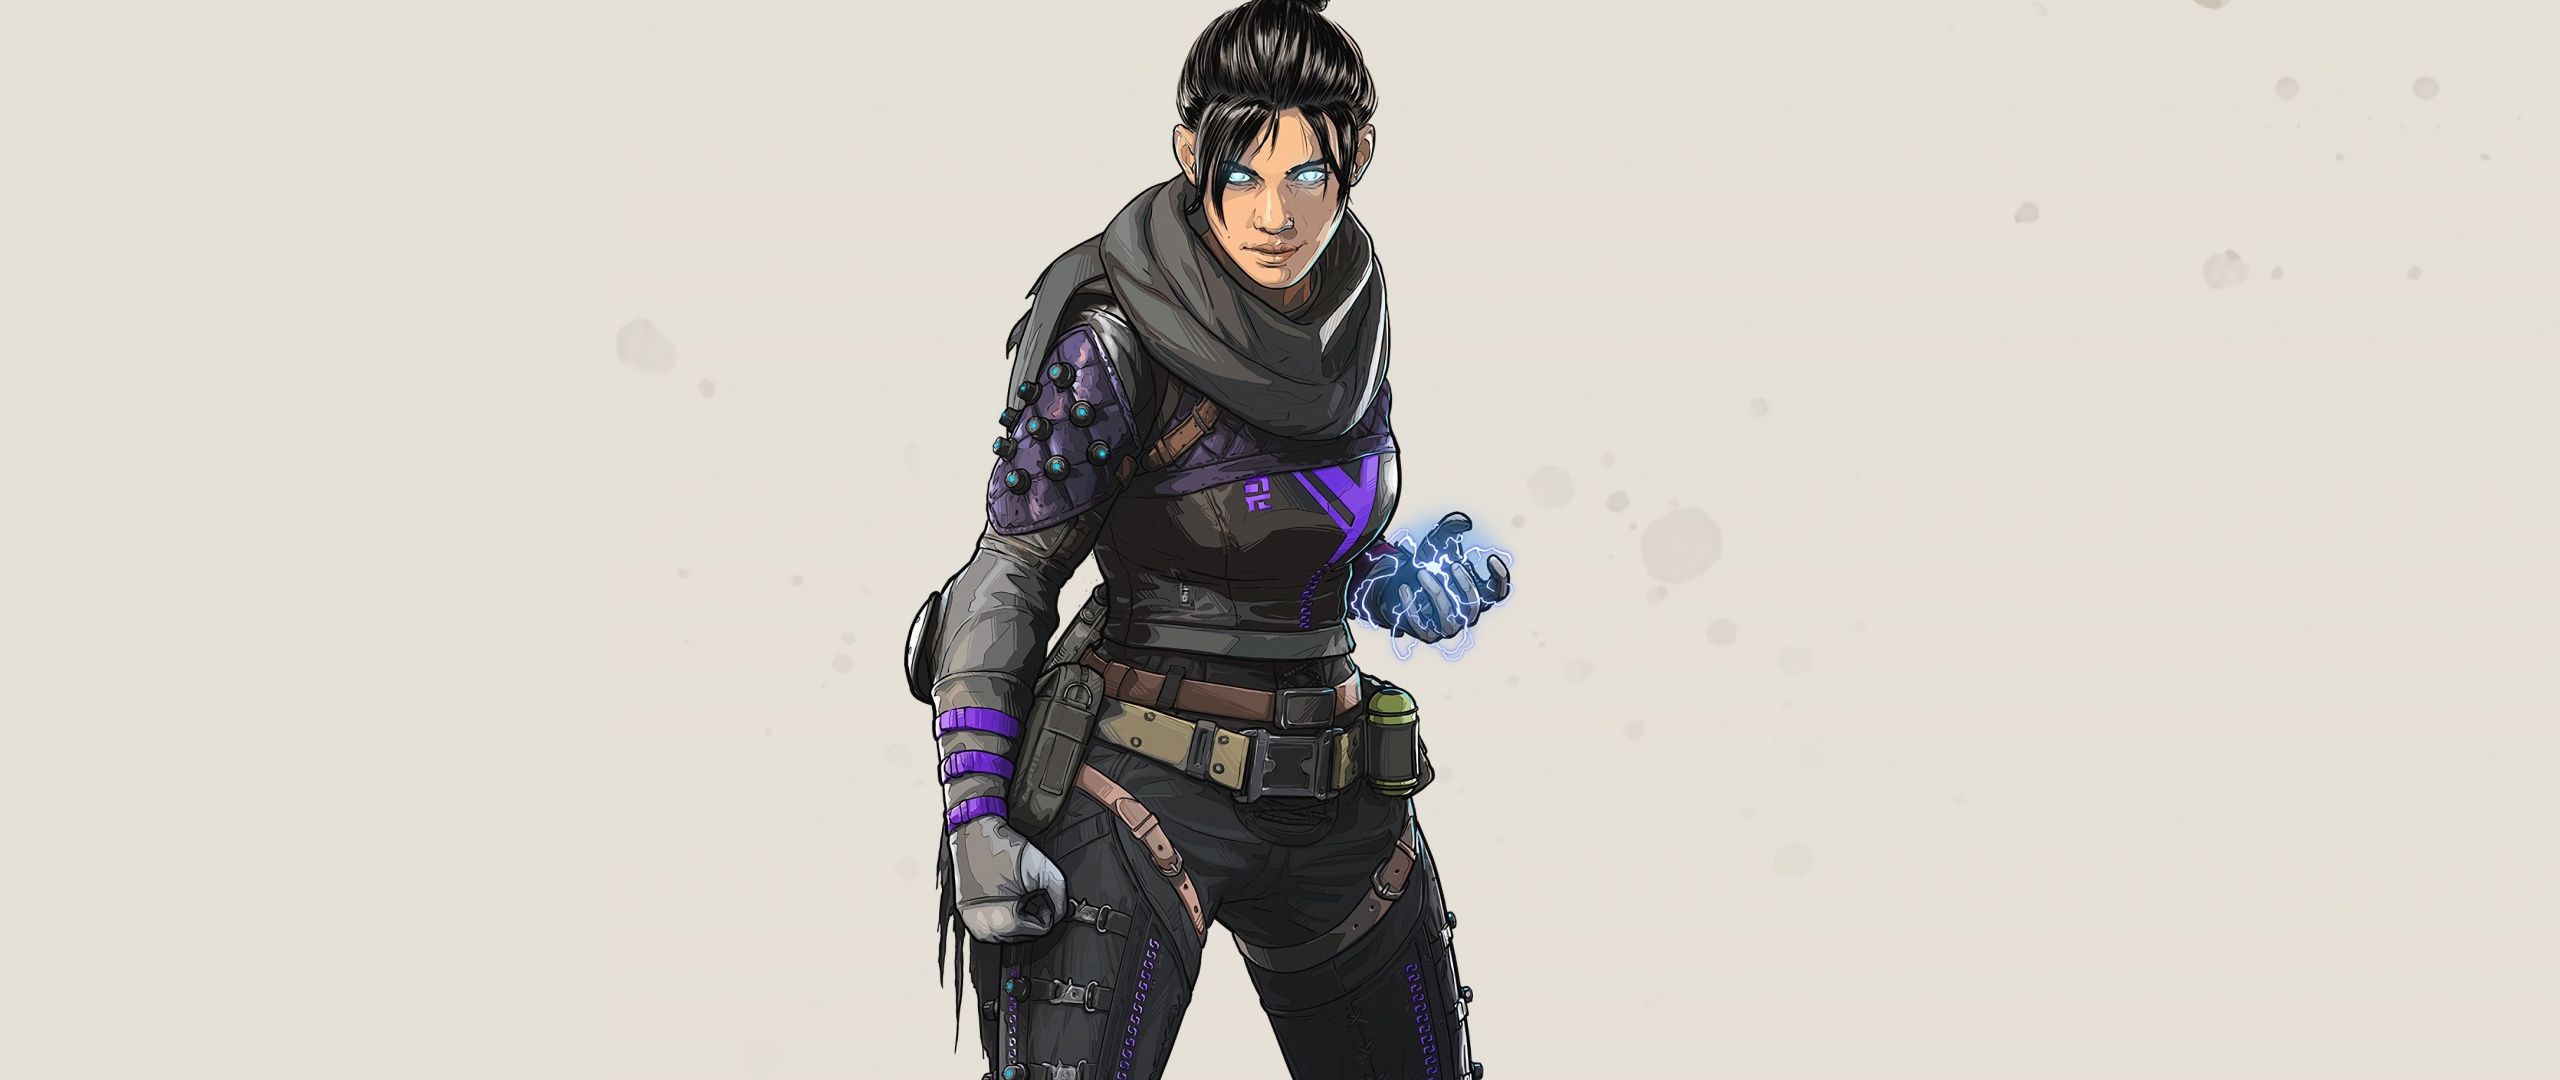 Download Artwork, Wraith, angry girl, Apex Legends wallpaper